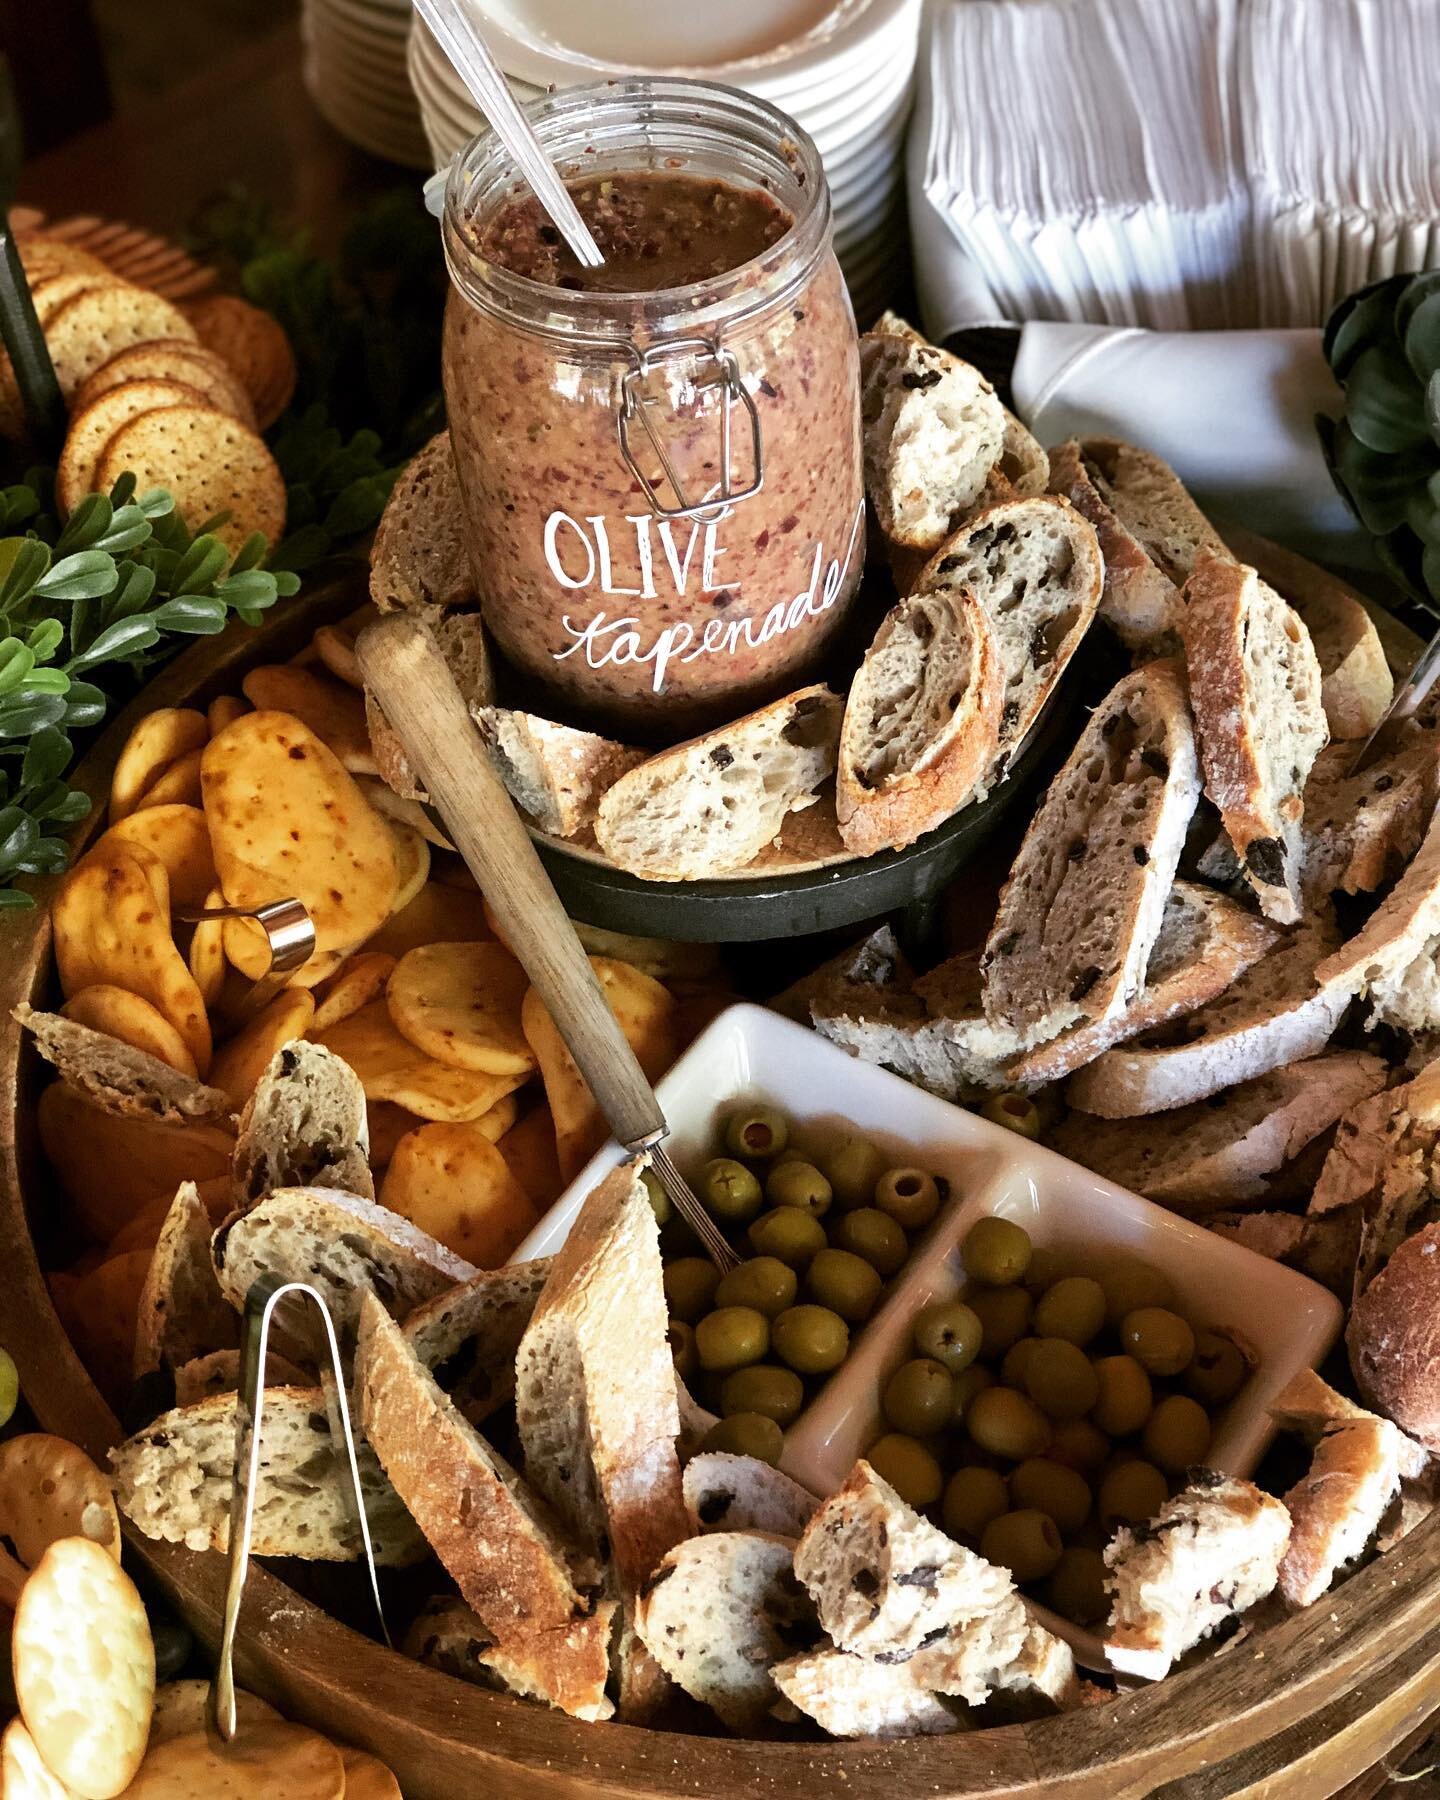 Olive tapenade with warm naan bread, and a delicious warm rosemary kalamata olive bread, one of many options for your #charcuterie board!  #foxinthewoodscatering  #sanmoritzlodge #sanmoritzweddings #lakearrowheadcatering #weddingcatering